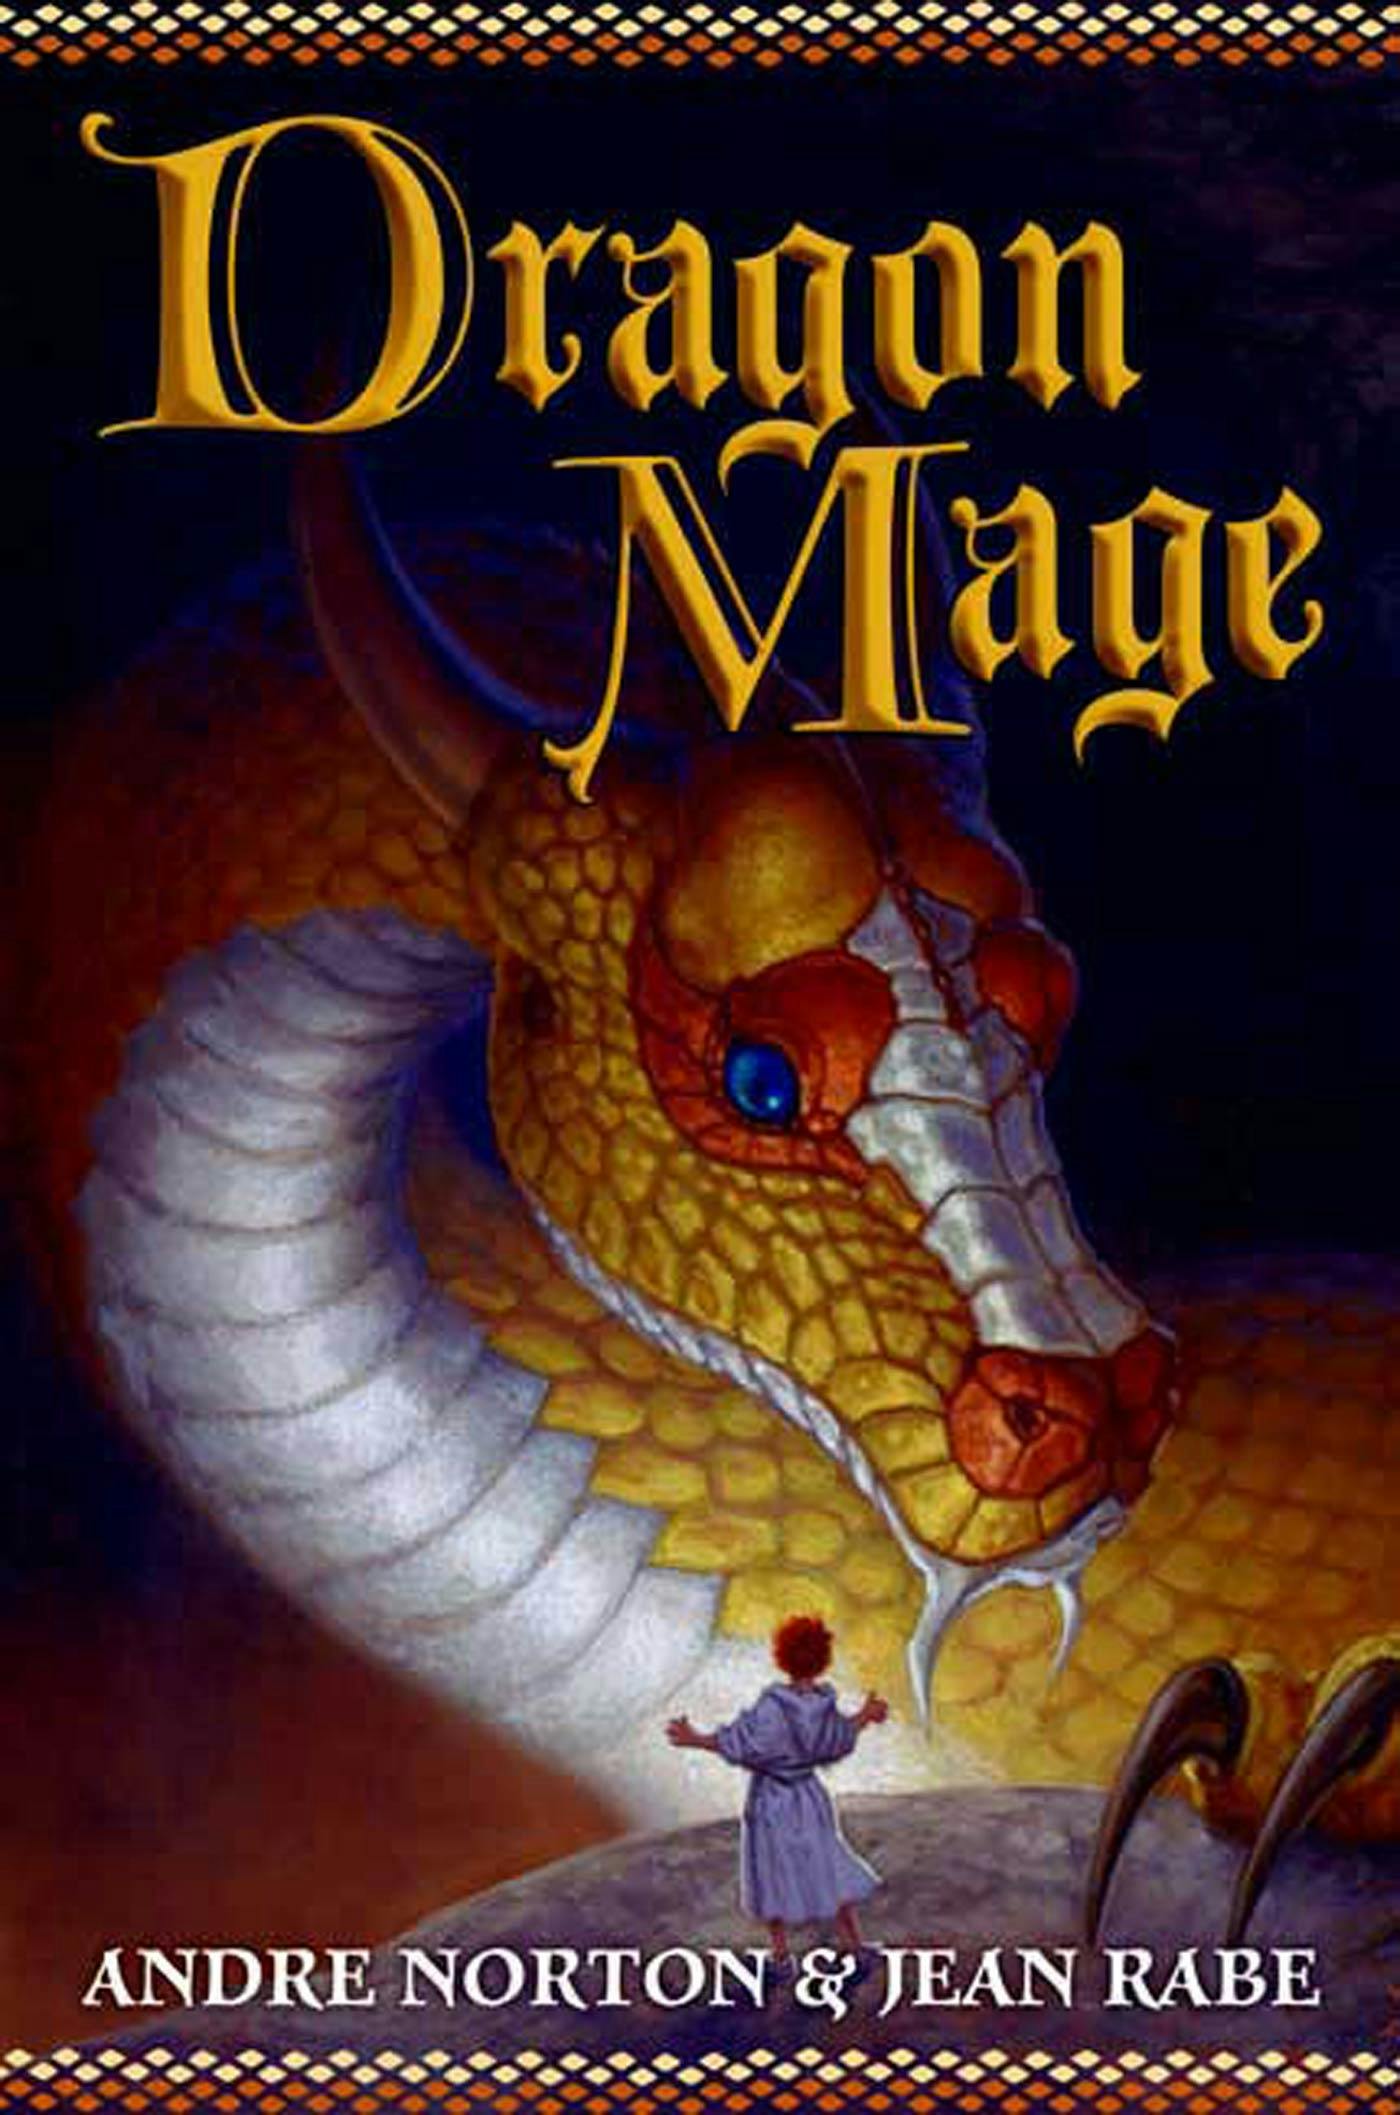 Cover for the book titled as: Dragon Mage